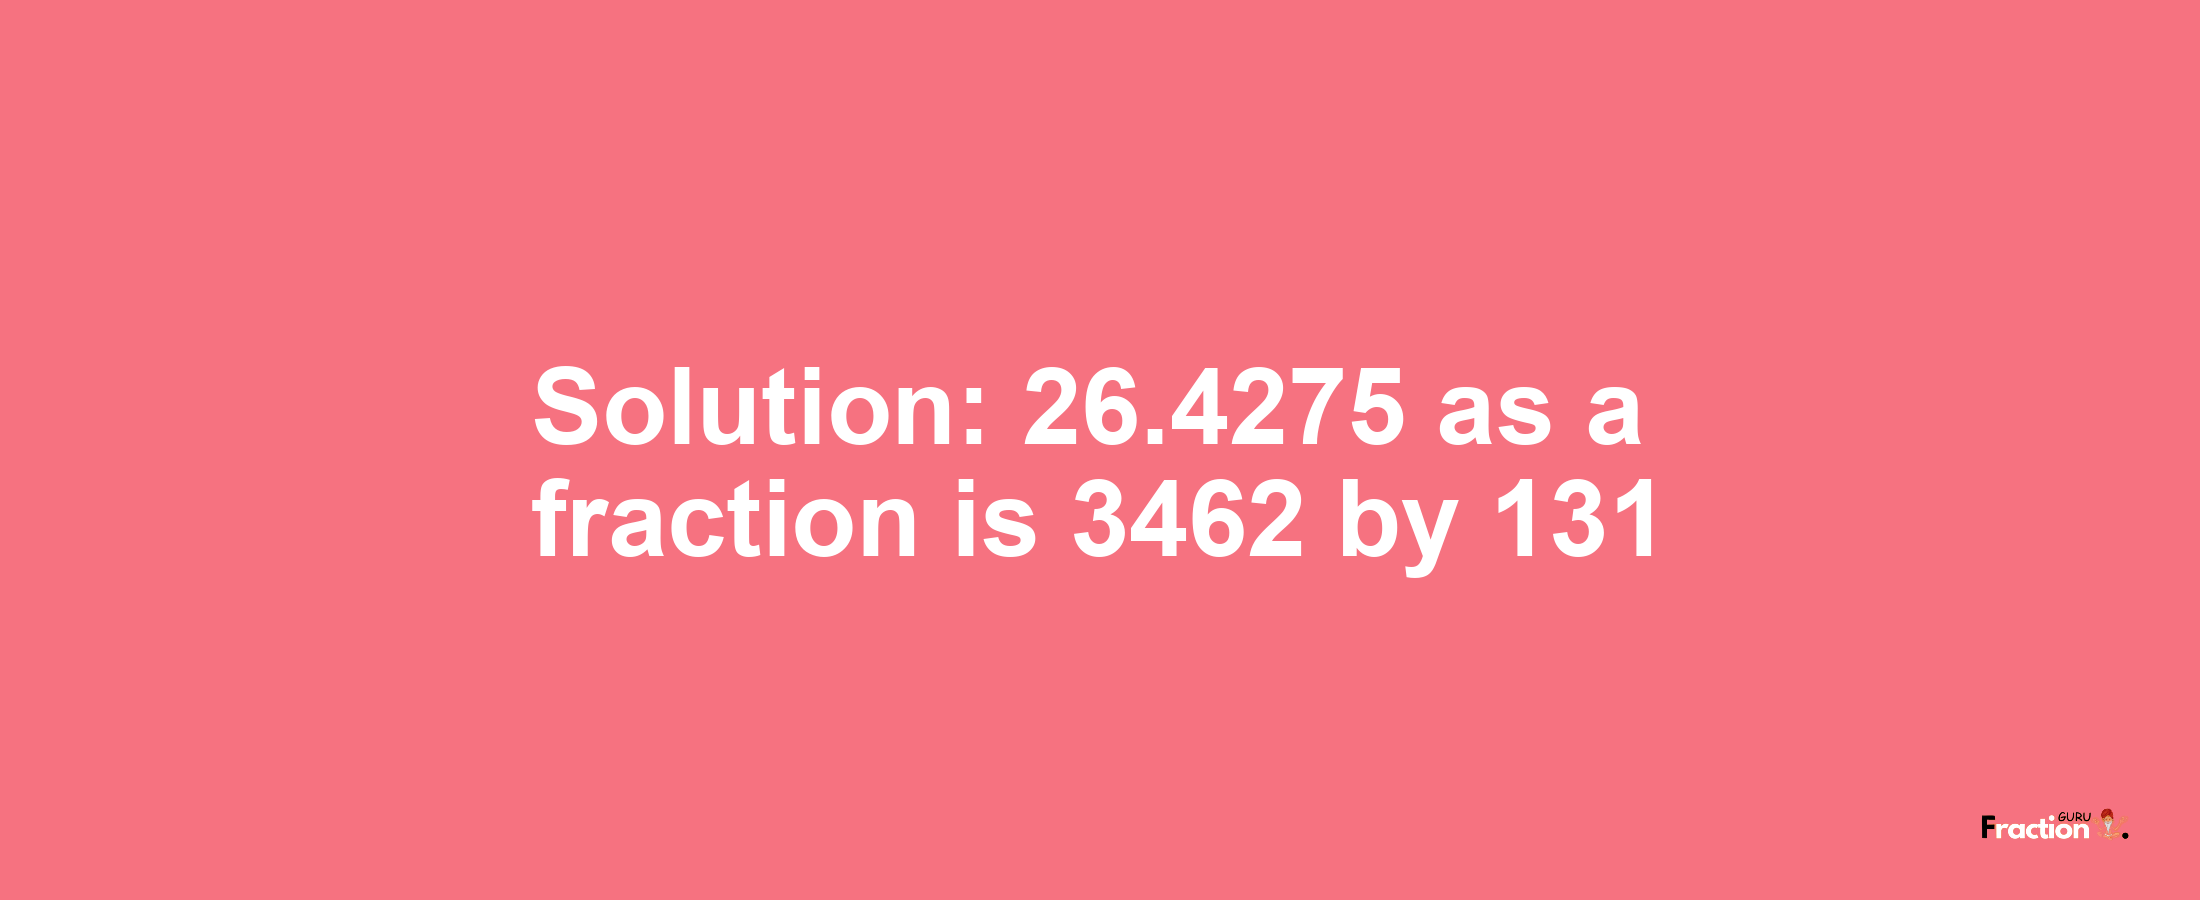 Solution:26.4275 as a fraction is 3462/131